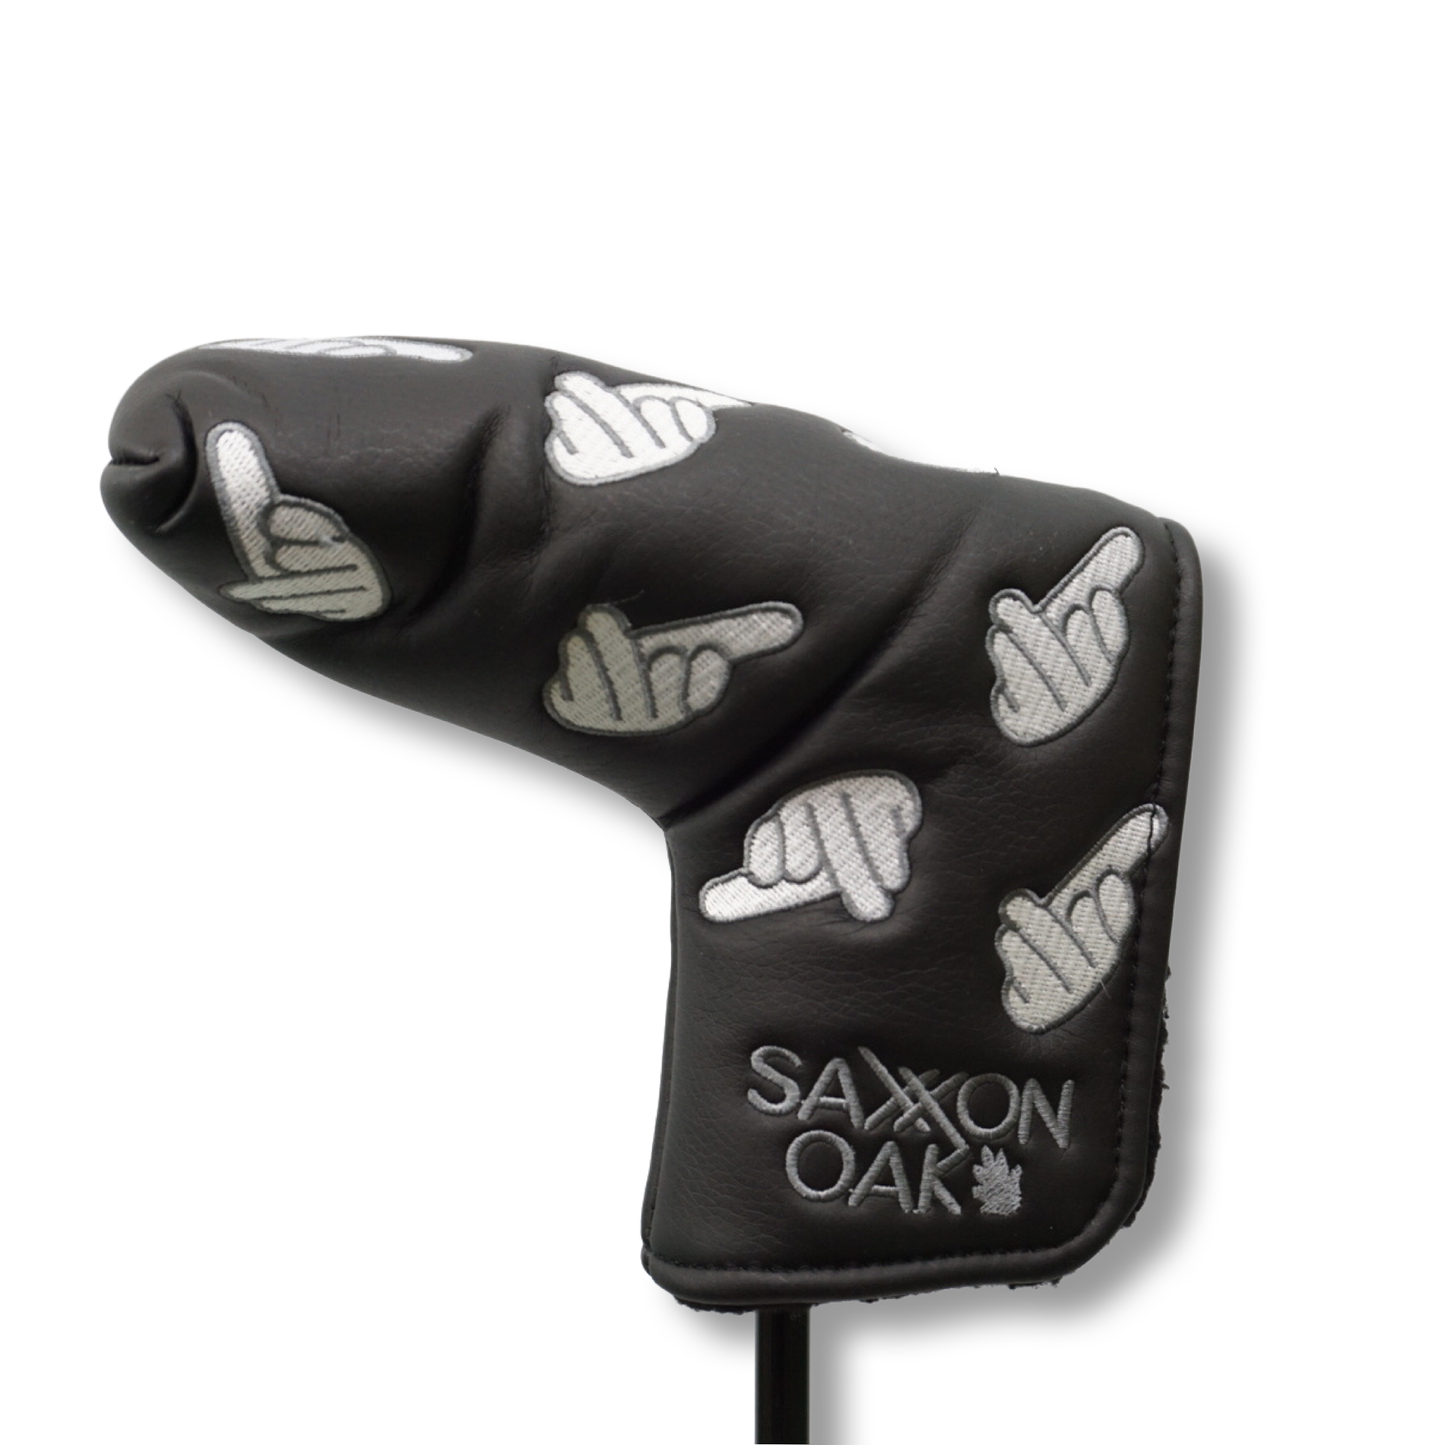 The “Shooter” Putter Cover